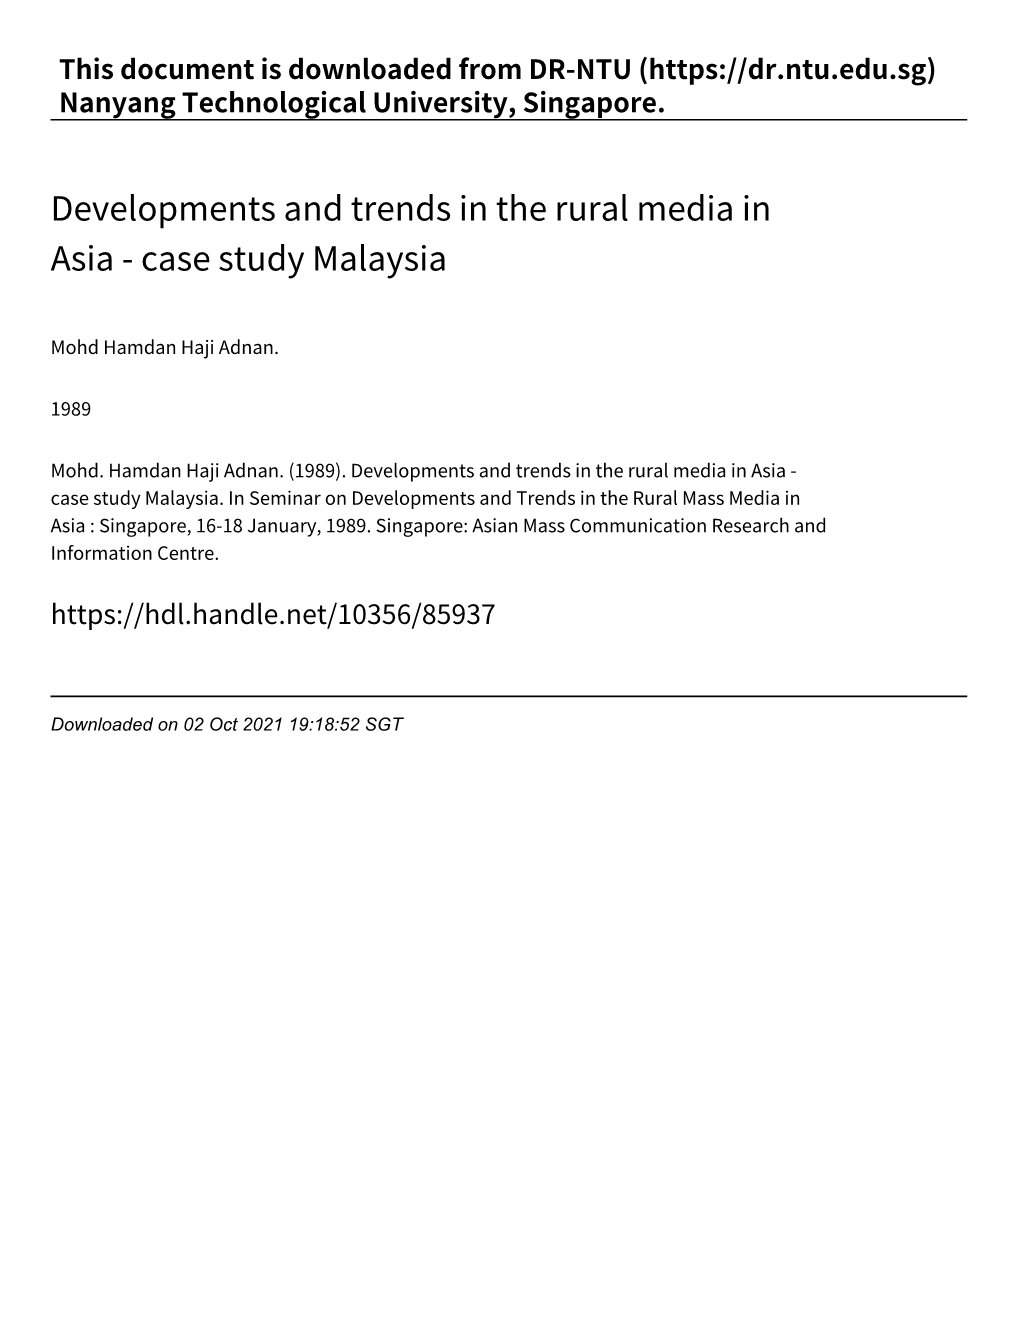 Developments and Trends in the Rural Media in Asia ‑ Case Study Malaysia